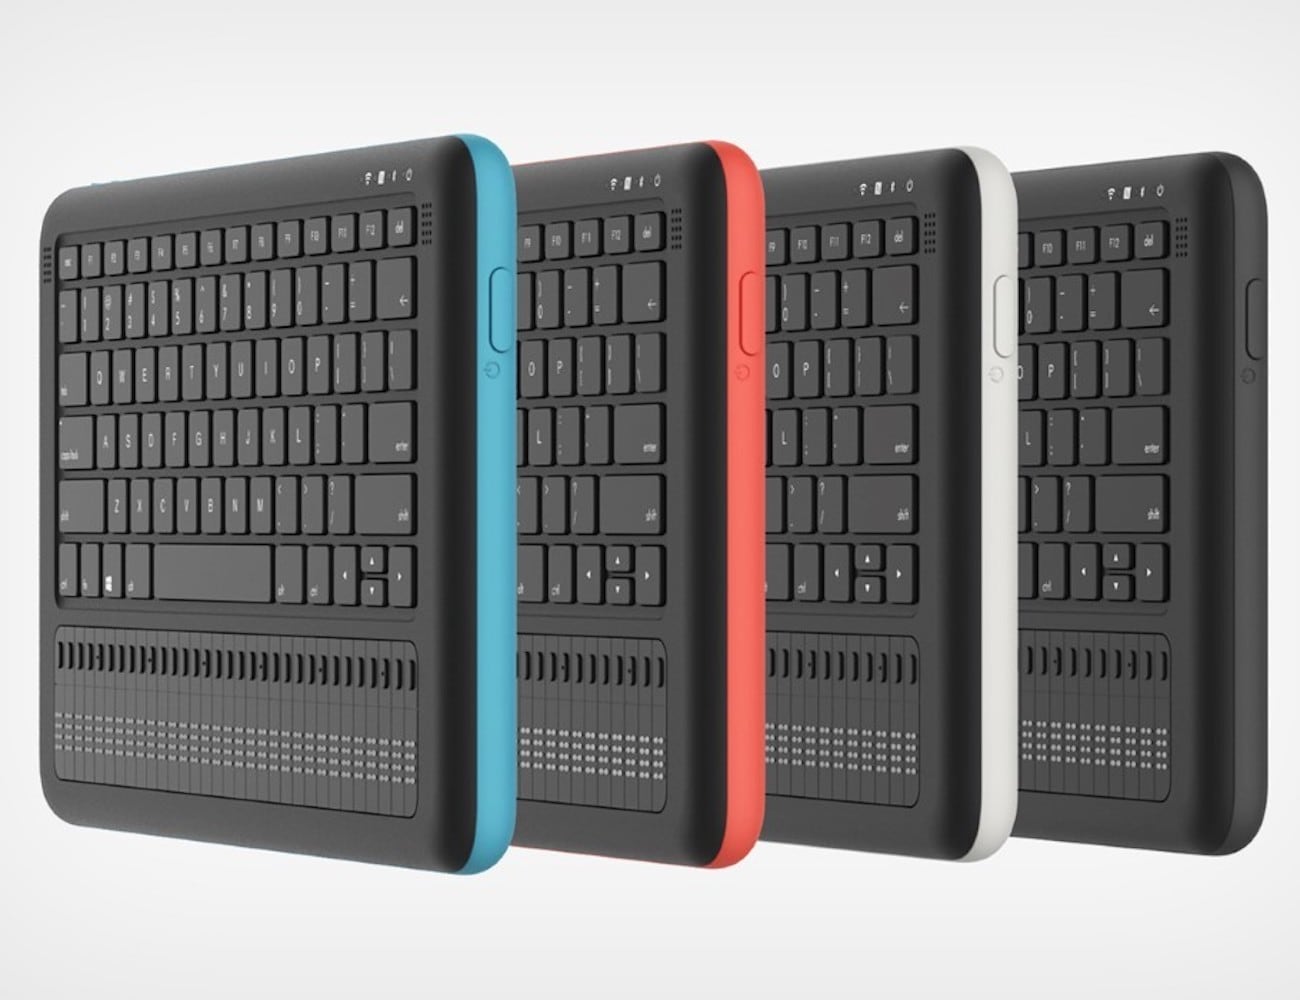 Braille-book All-In-One PC serves those with different visual abilities